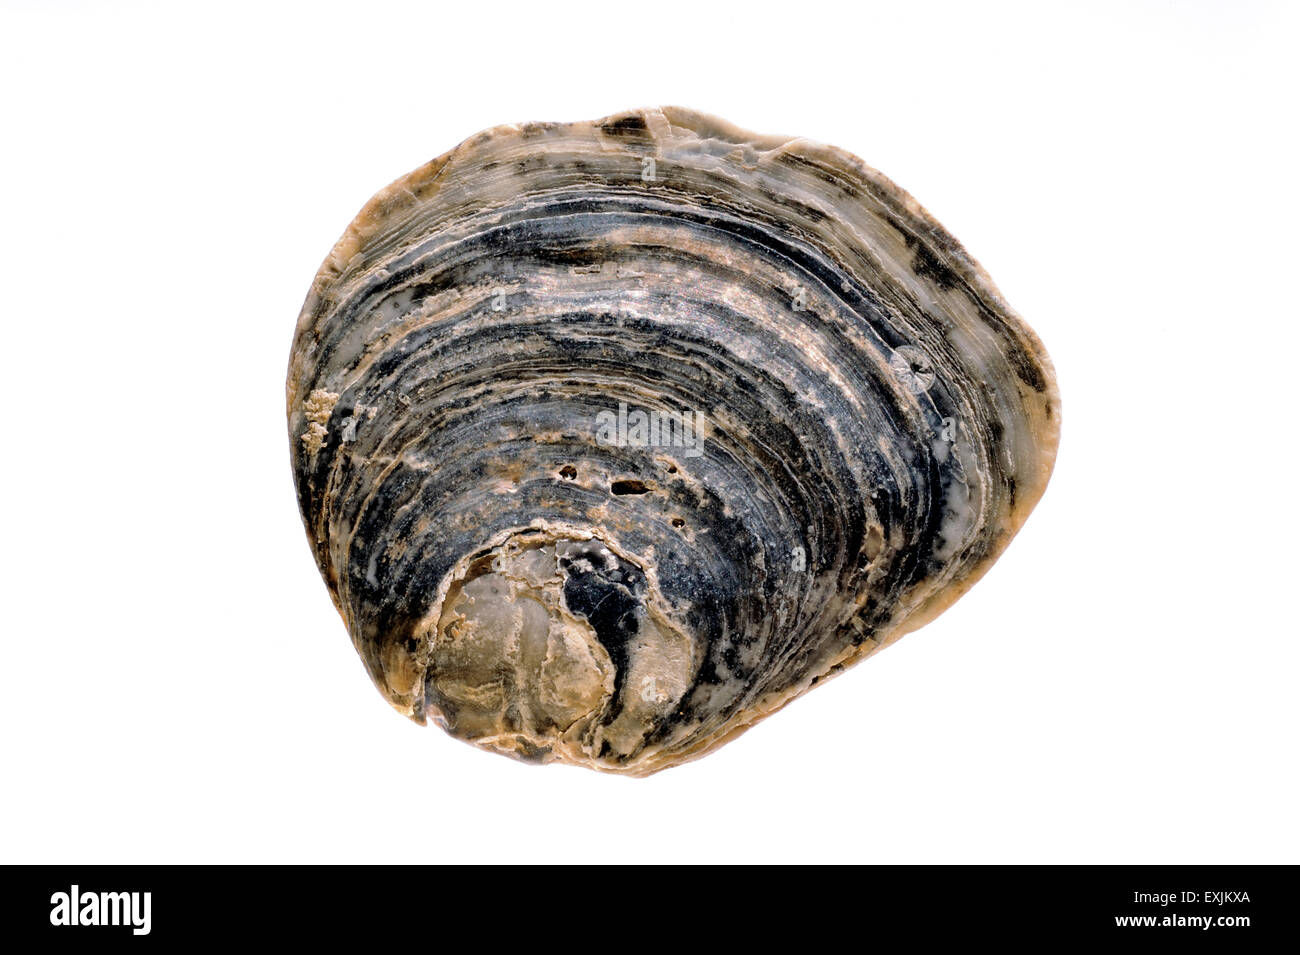 Common oyster / European flat oyster / mud oyster / edible oyster (Ostrea edulis) shell on white background Stock Photo